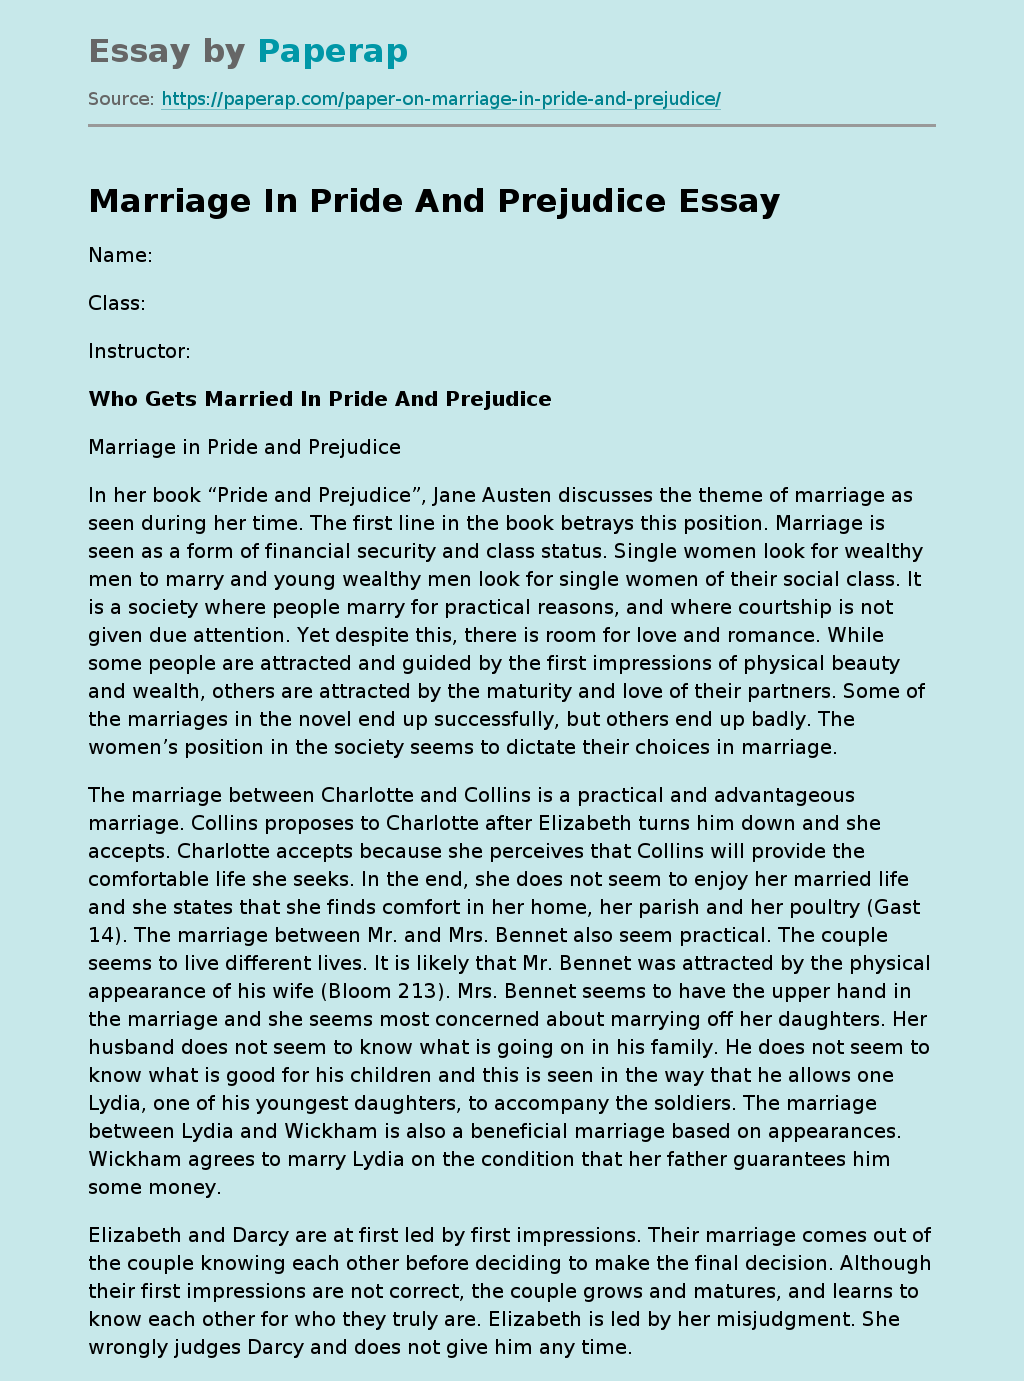 Marriage In Pride And Prejudice